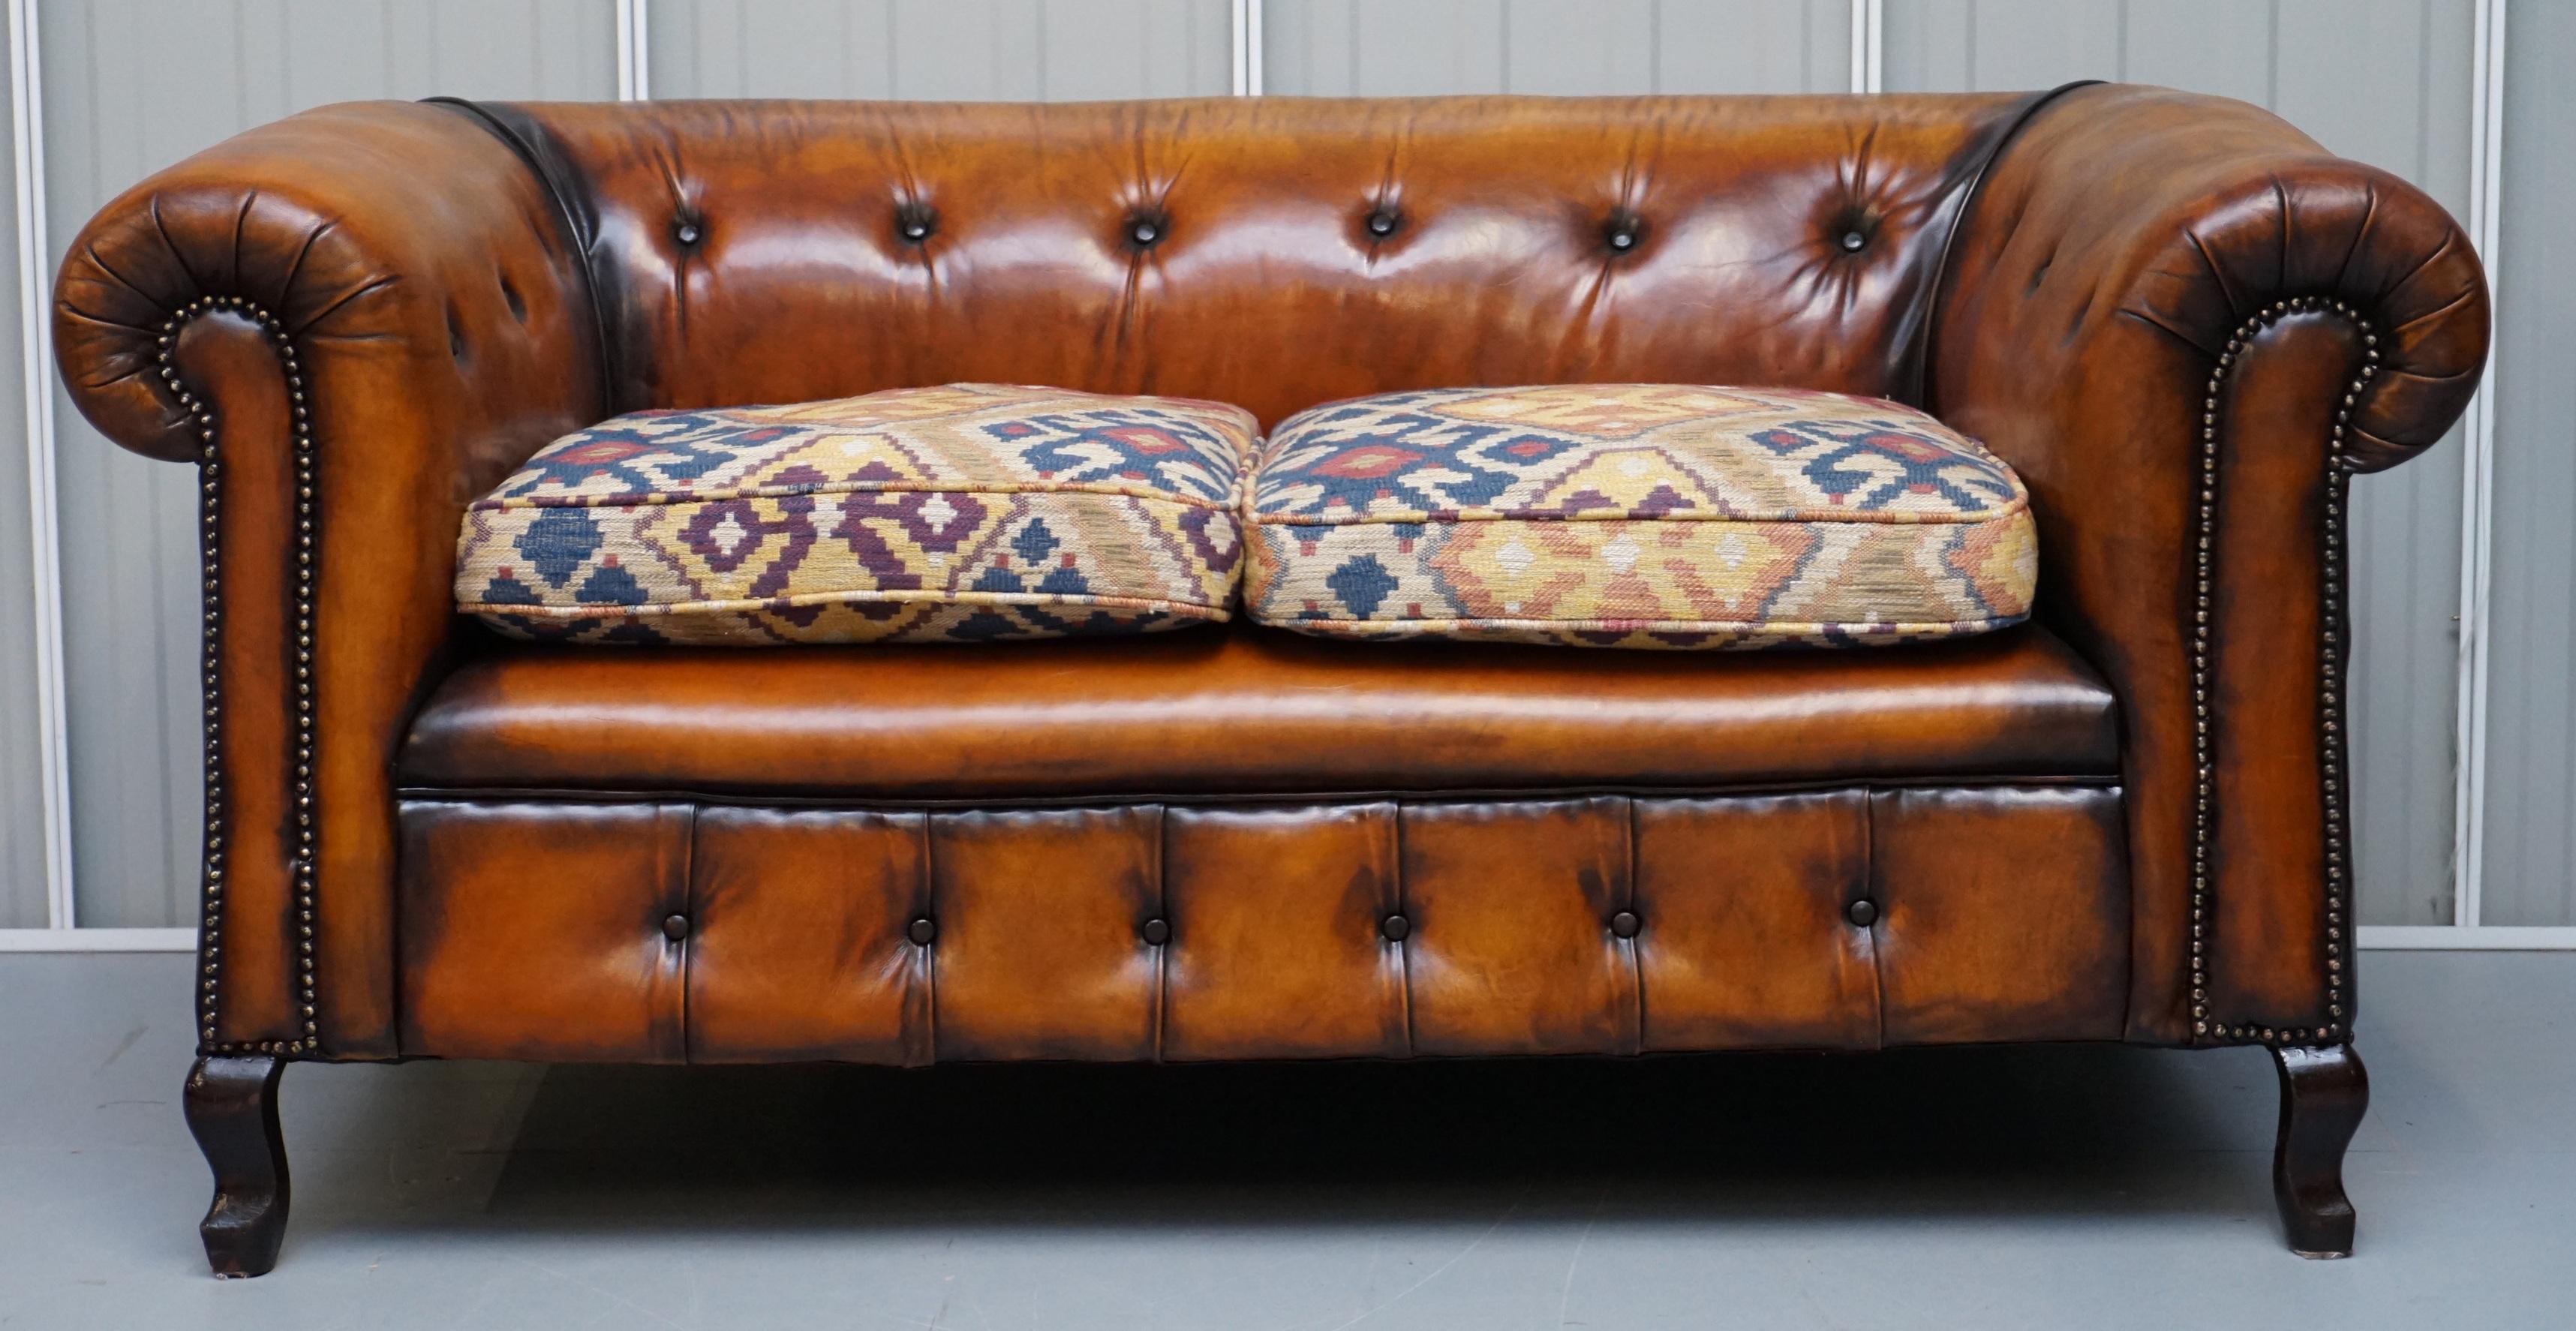 We are delighted to offer for sale one of two fully restored hand dyed whisky brown leather Chesterfield sofas with kilim upholstered cushions

This auction is for one sofa, the other sofa is listed under my other items and not included in this